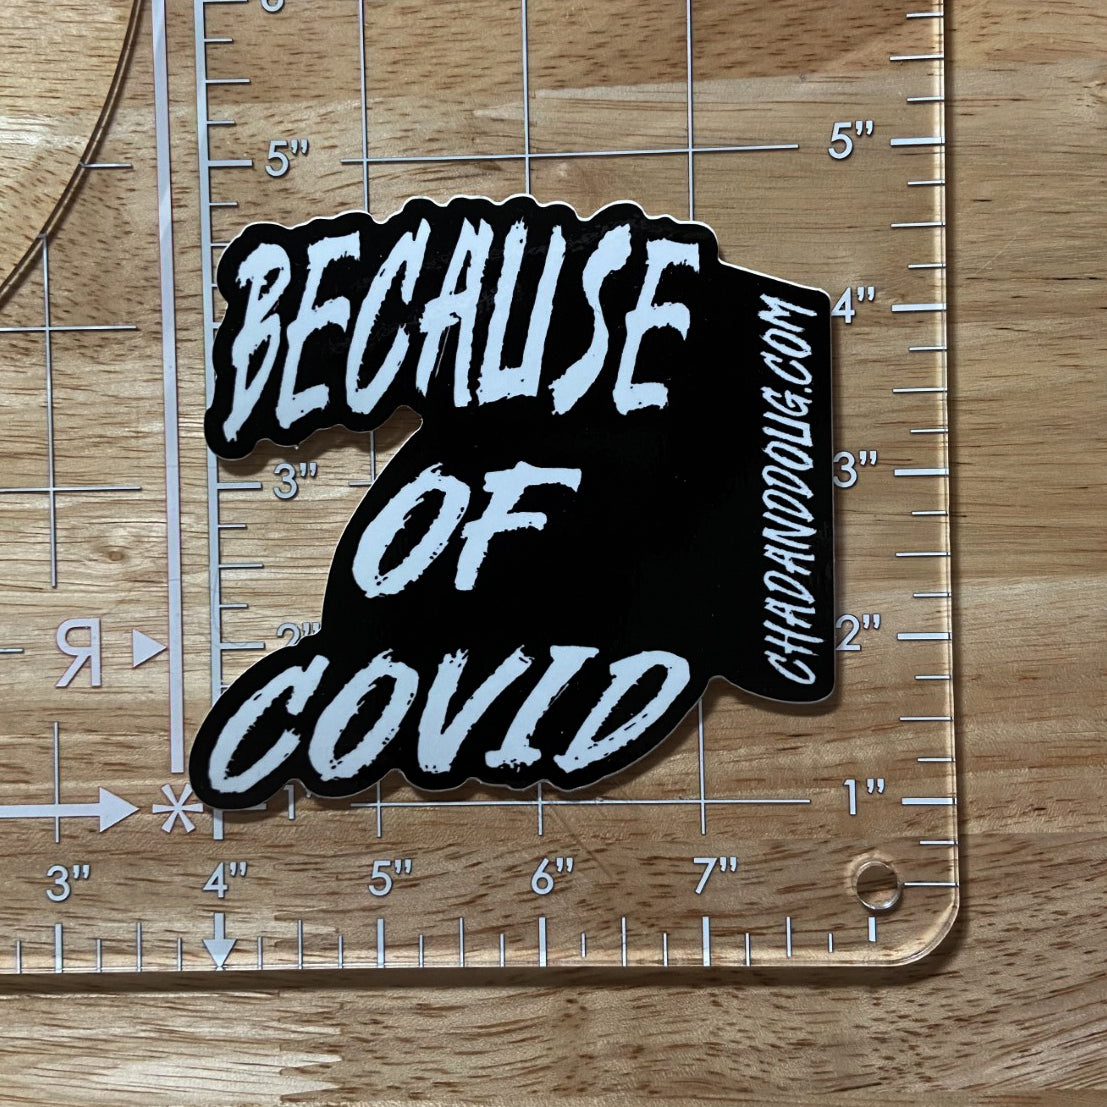 CAD Because of Covid large sticker